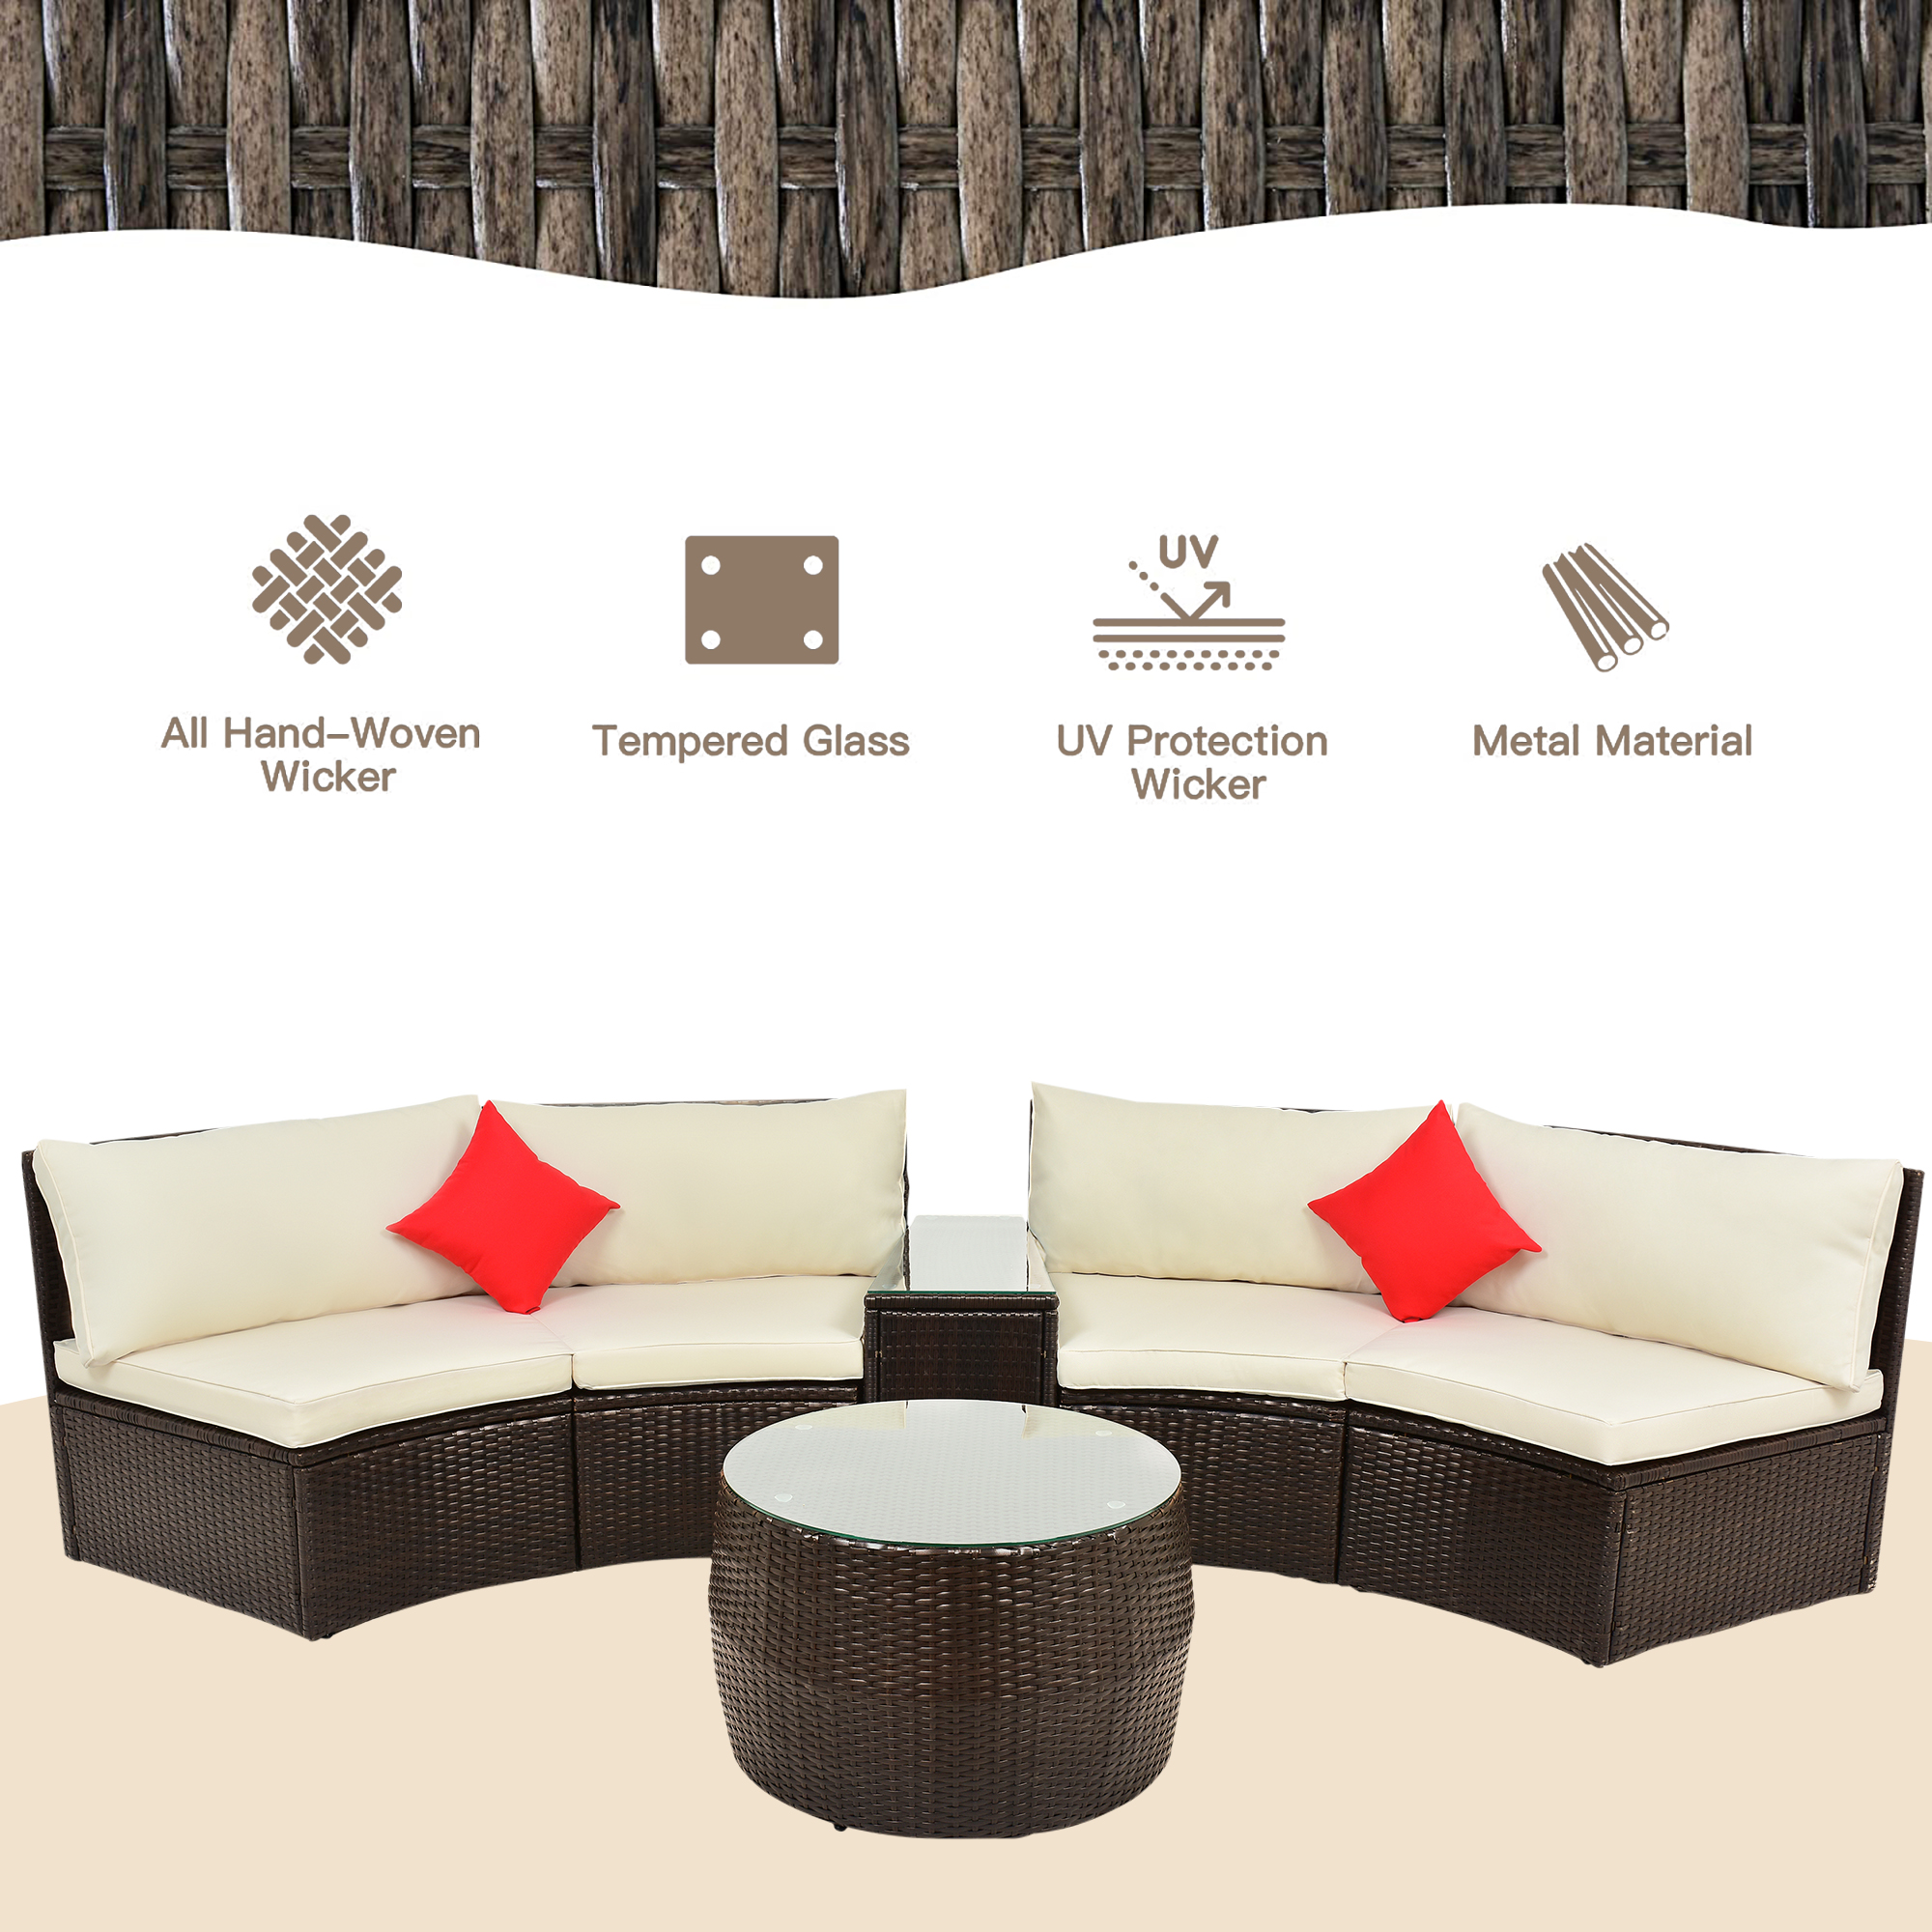 4PCS Outdoor Patio Furniture Sets, Patio Rattan Wicker Half-Moon Sectional Furniture Conversation Sets with 2 Pillows, Coffee Table and Side Table, Backyard Wicker Outdoor Companion Sets, S5567 - image 4 of 9